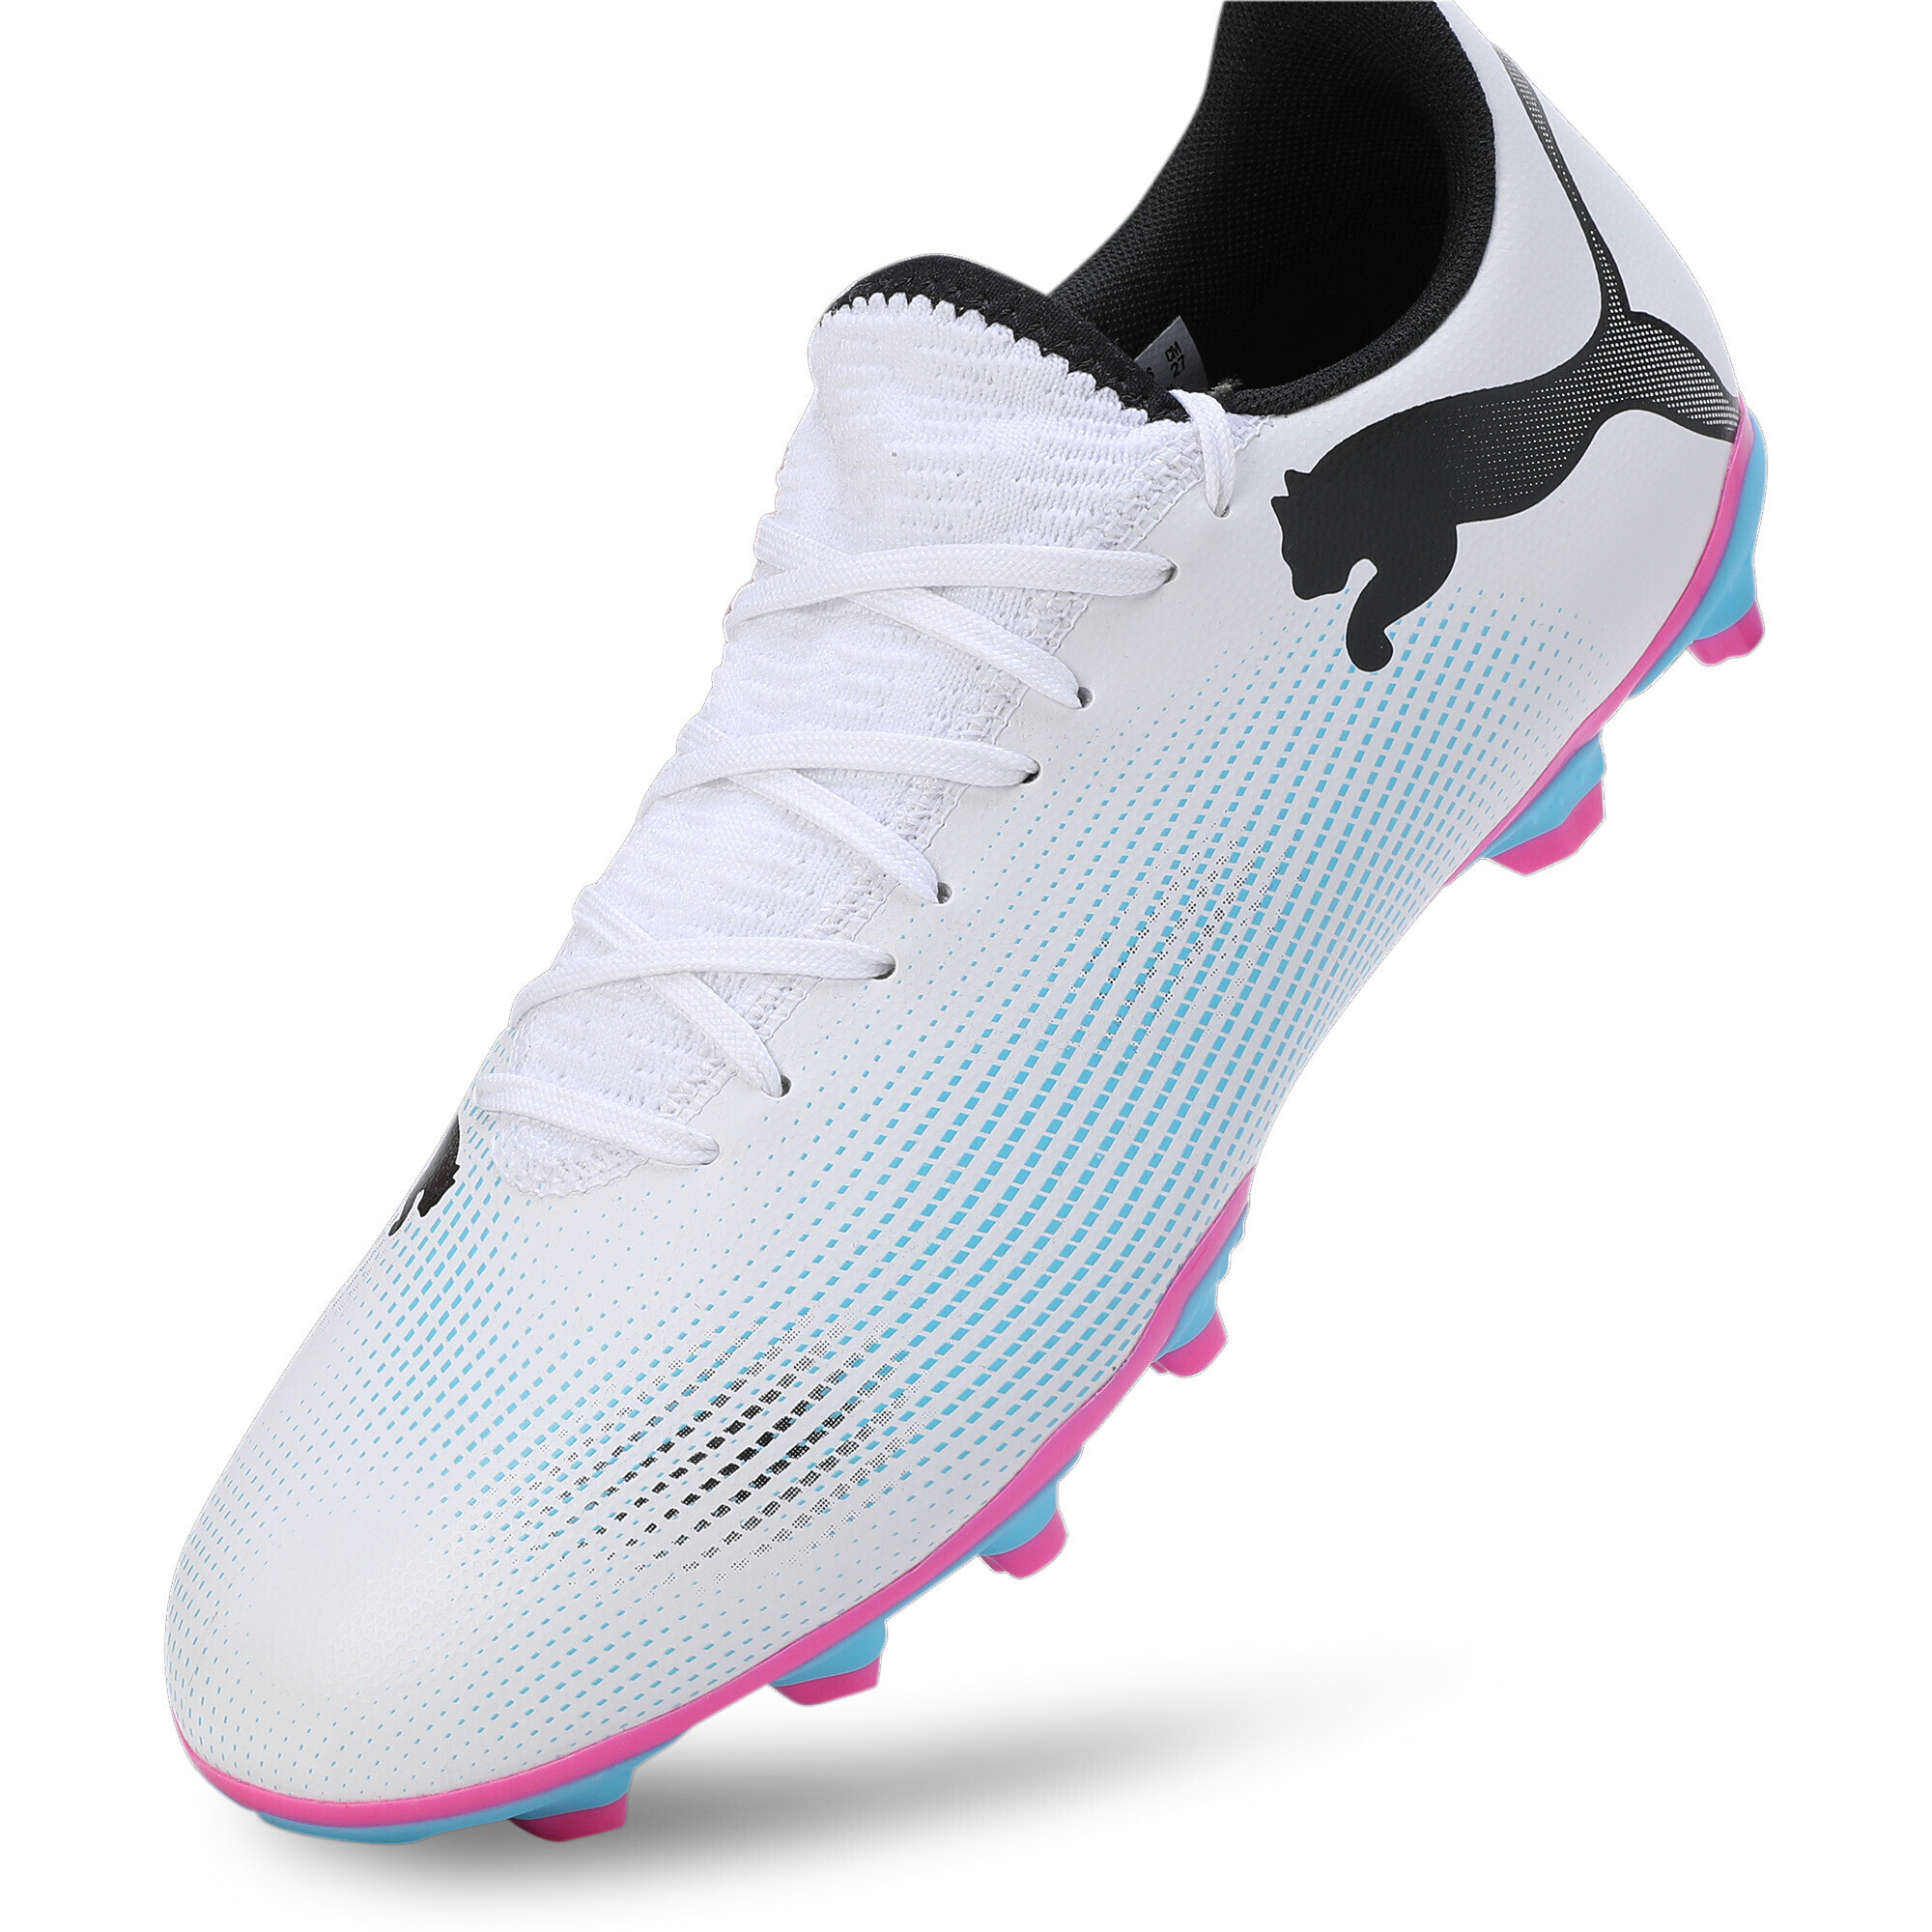 Men's PUMA FUTURE 7 PLAY FG/AG Football Boots In White/Pink, Size EU 44.5